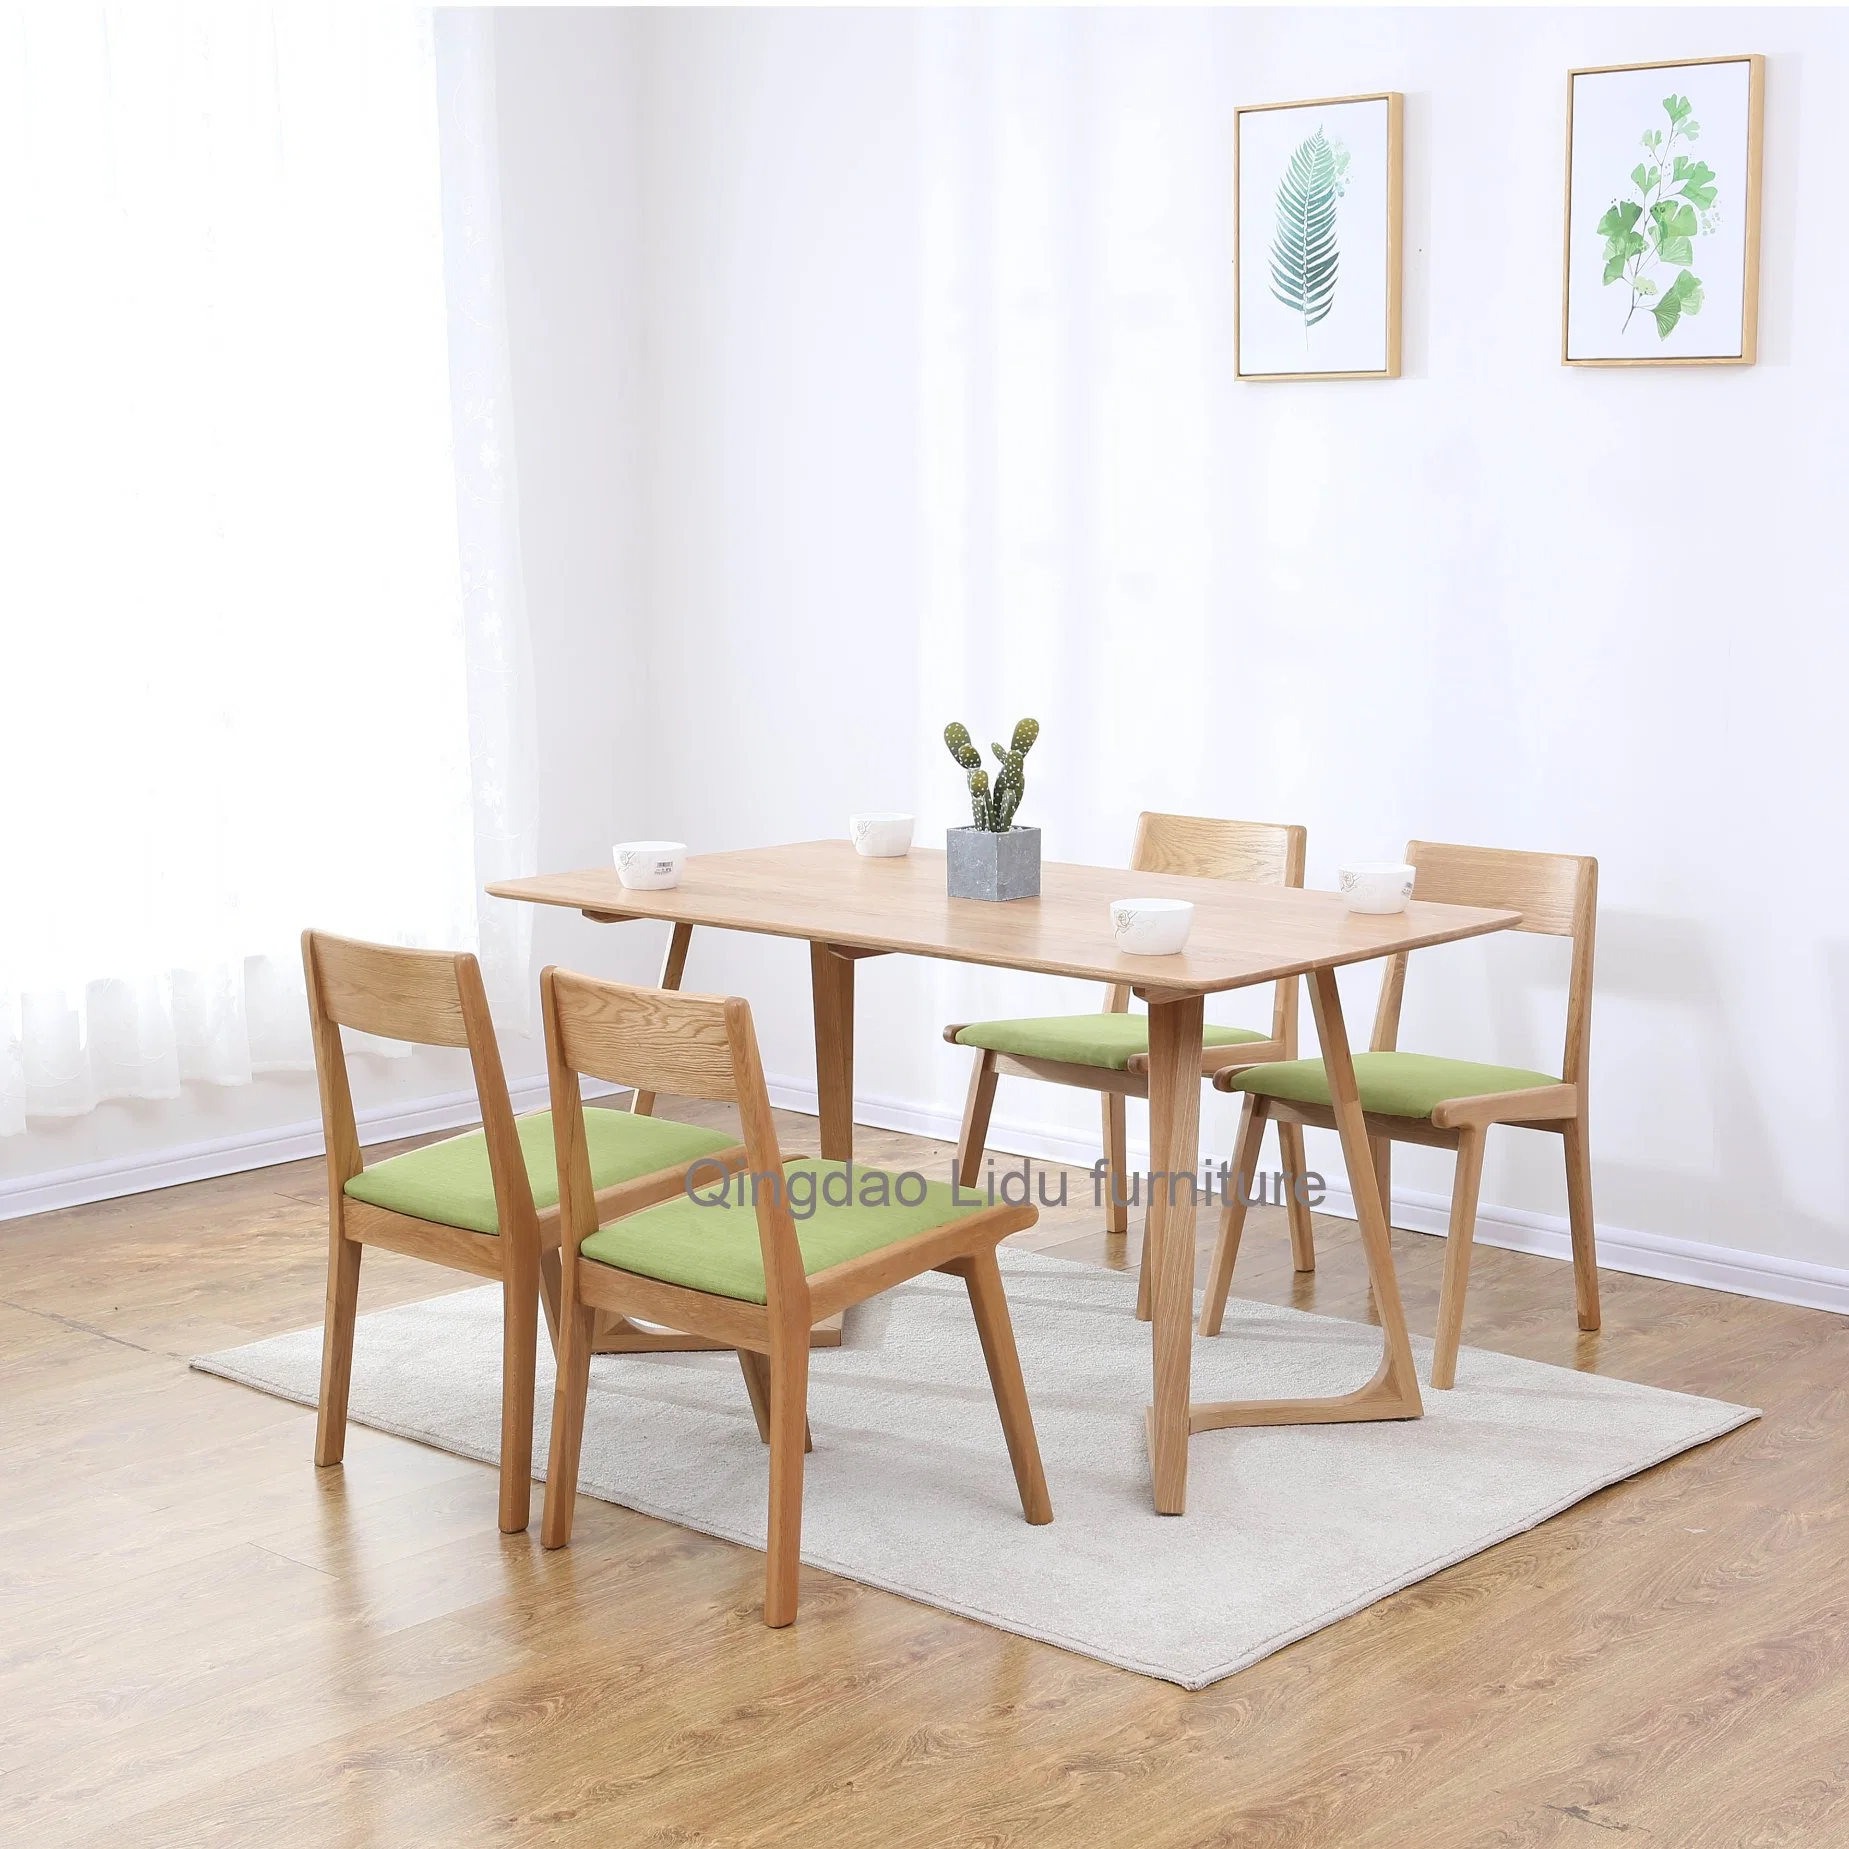 Wholesale/Supplier Wooden Dining Table Set with 6 Upholstery Fabric Chairs Dining Chair Tables and Chairs for Restaurant